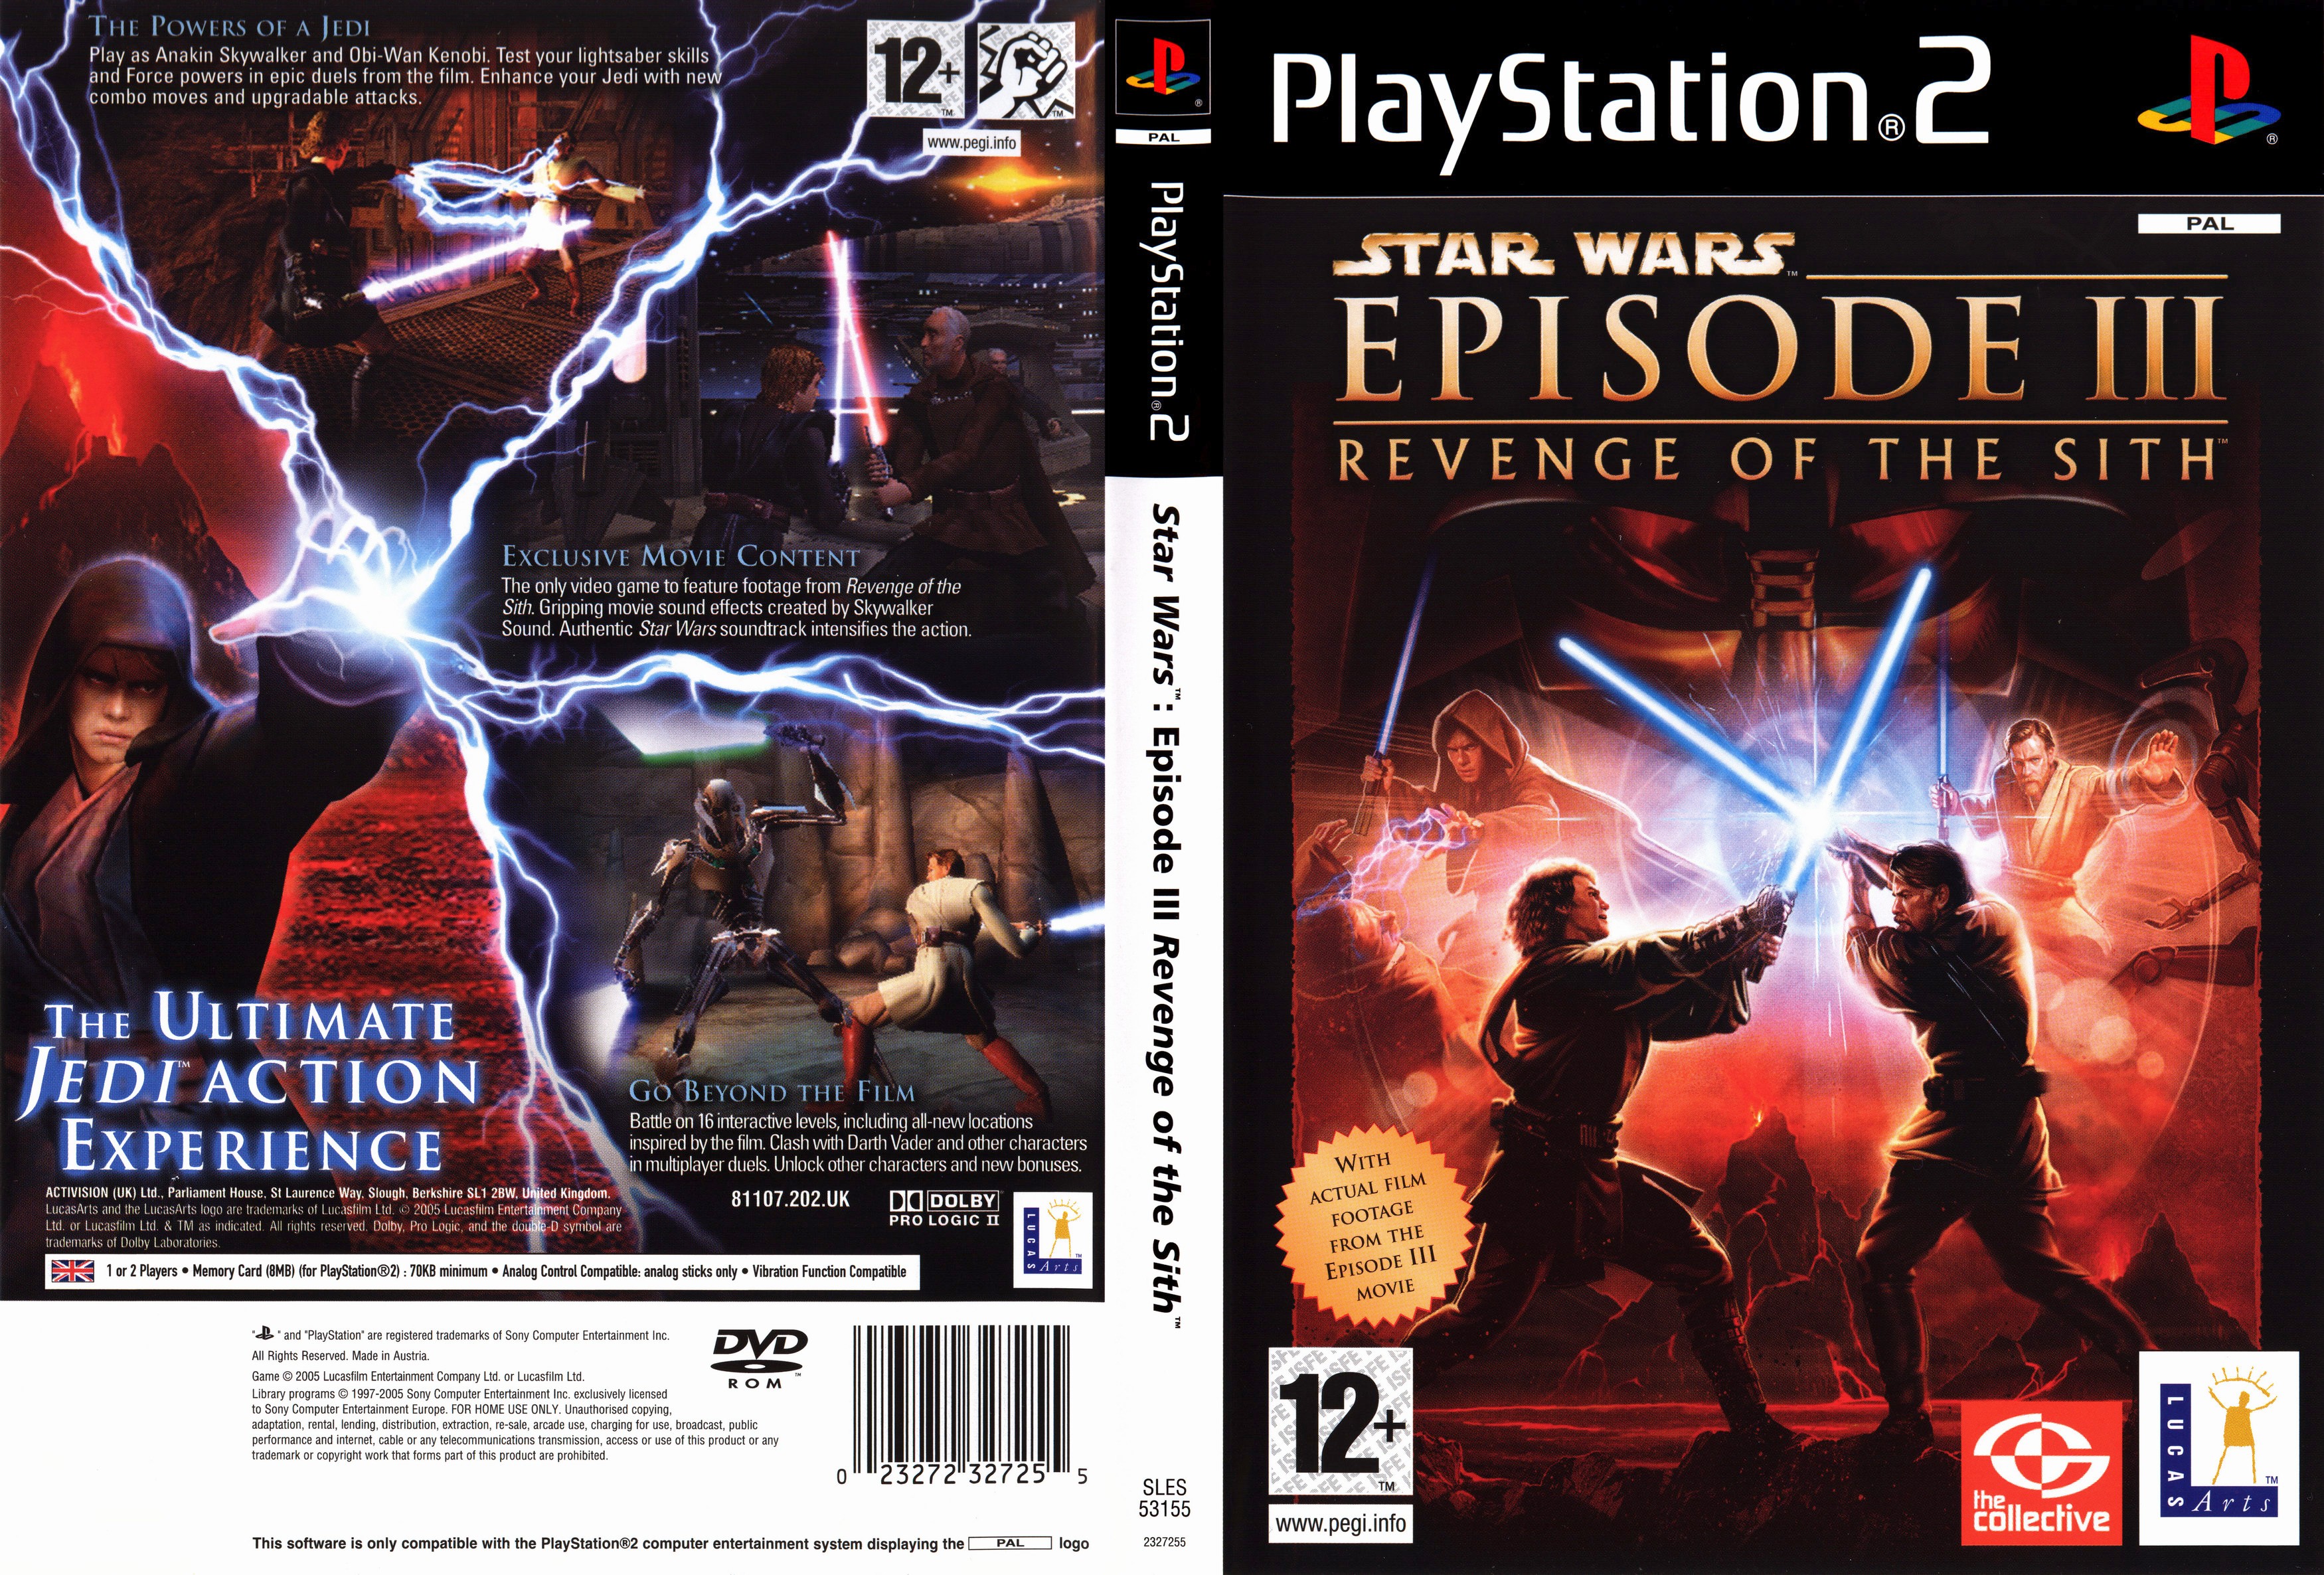 Star Wars - Episode III - Revenge of the Sith PS2 cover.